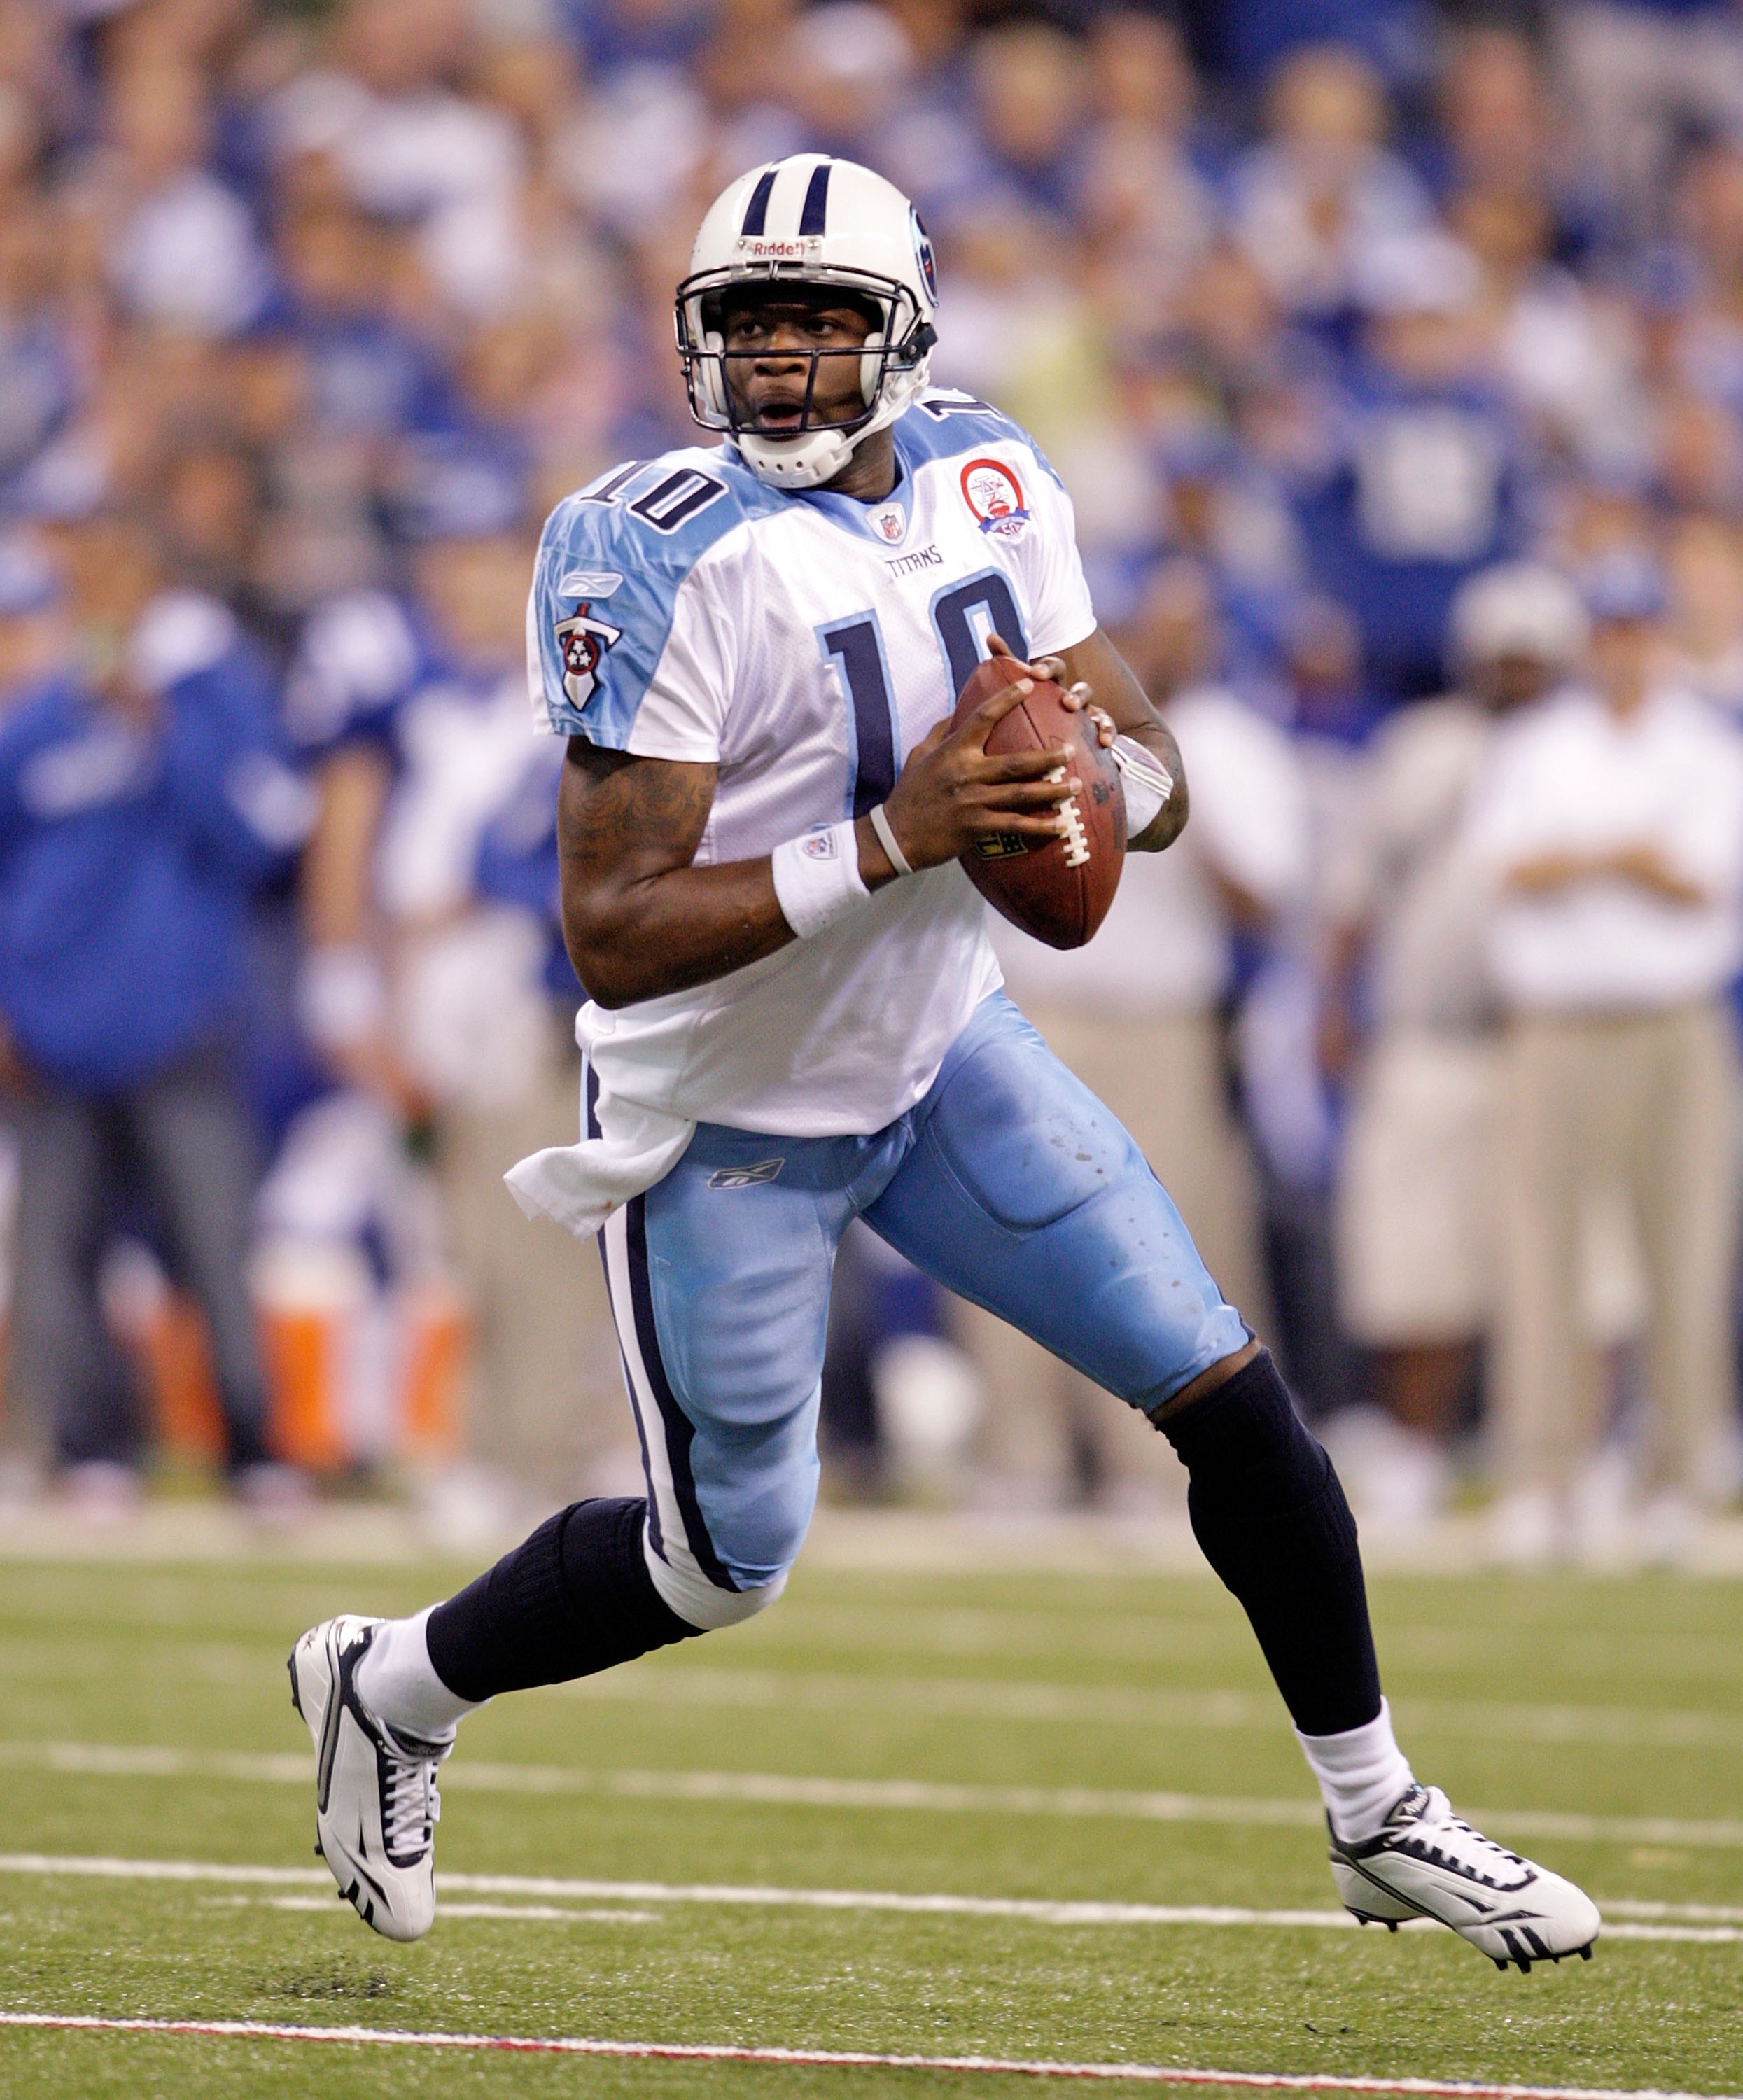 Is Tennessee Titans' Vince Young a Top 